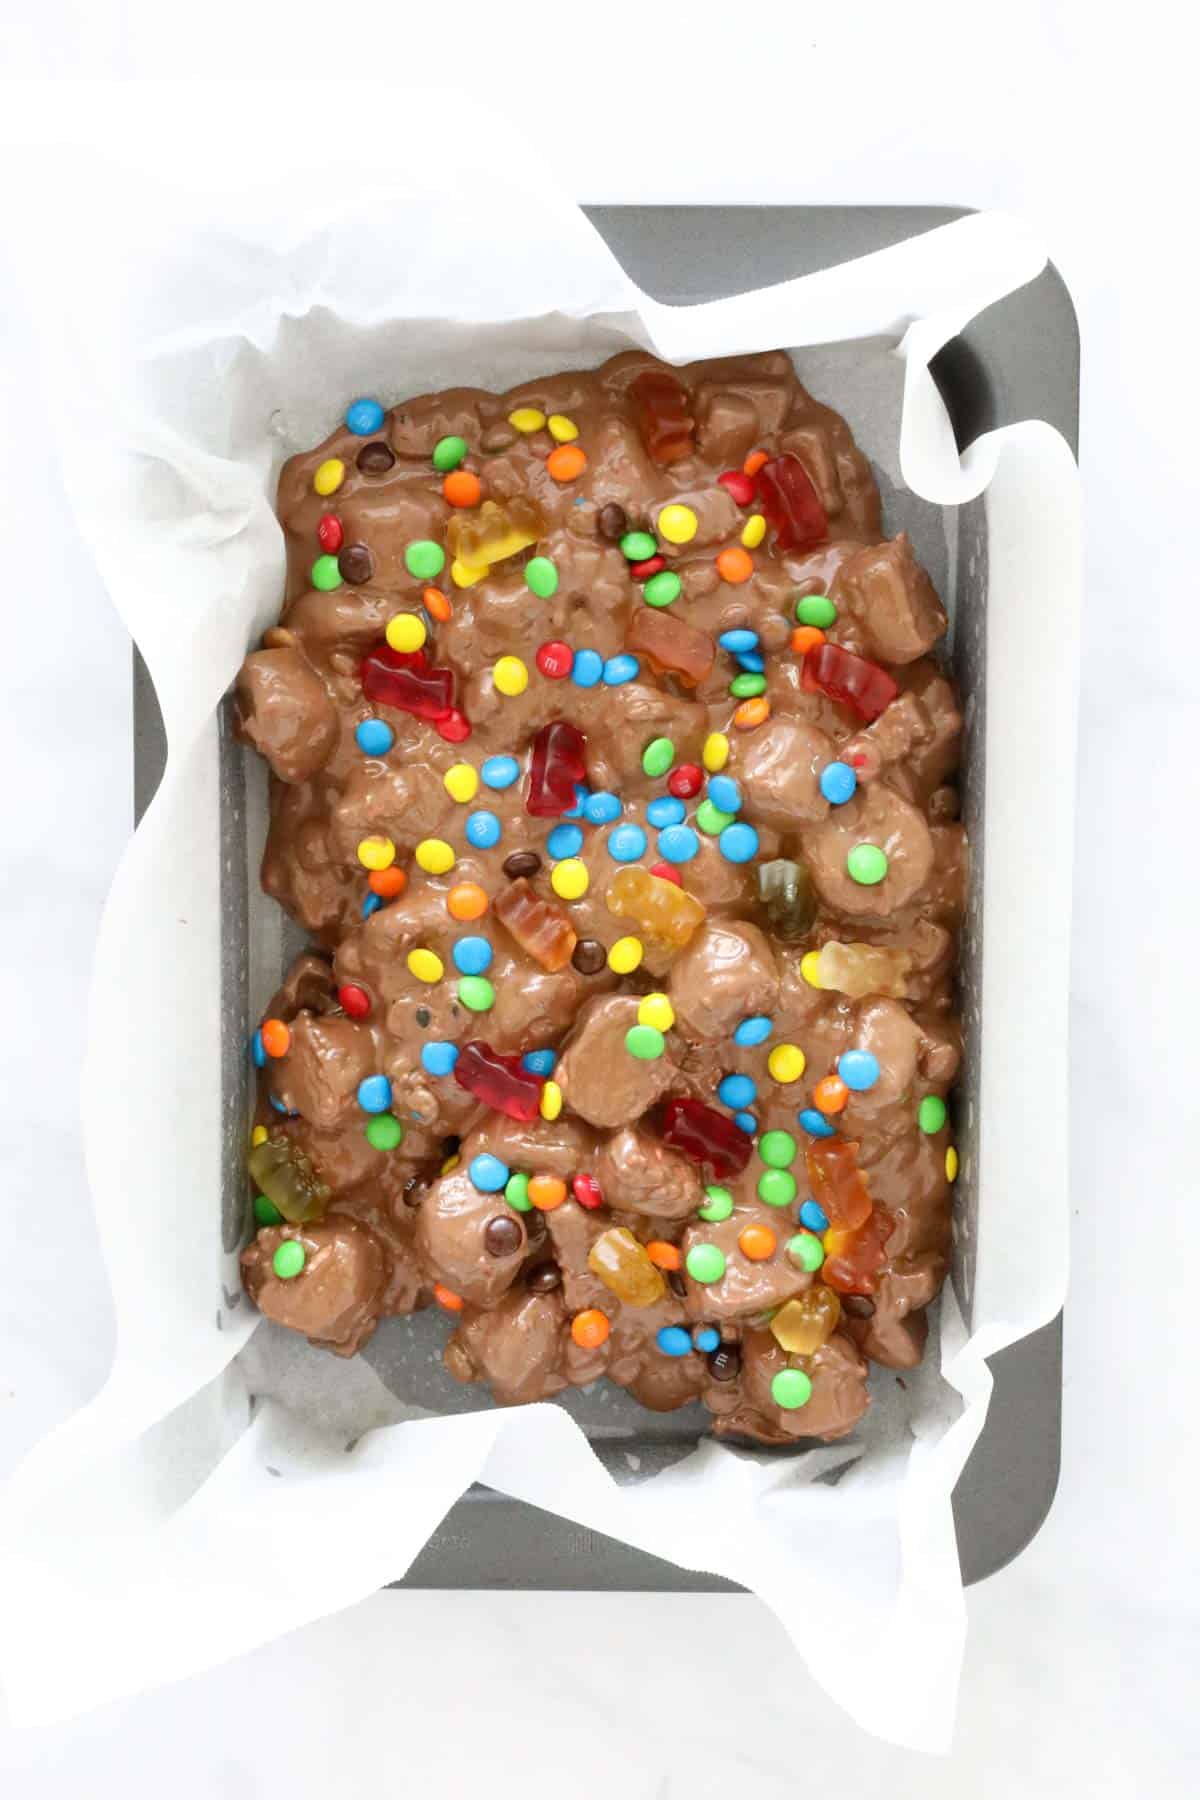 The rocky road mixture poured into a baking tray with mini M&M's sprinkled over the top.